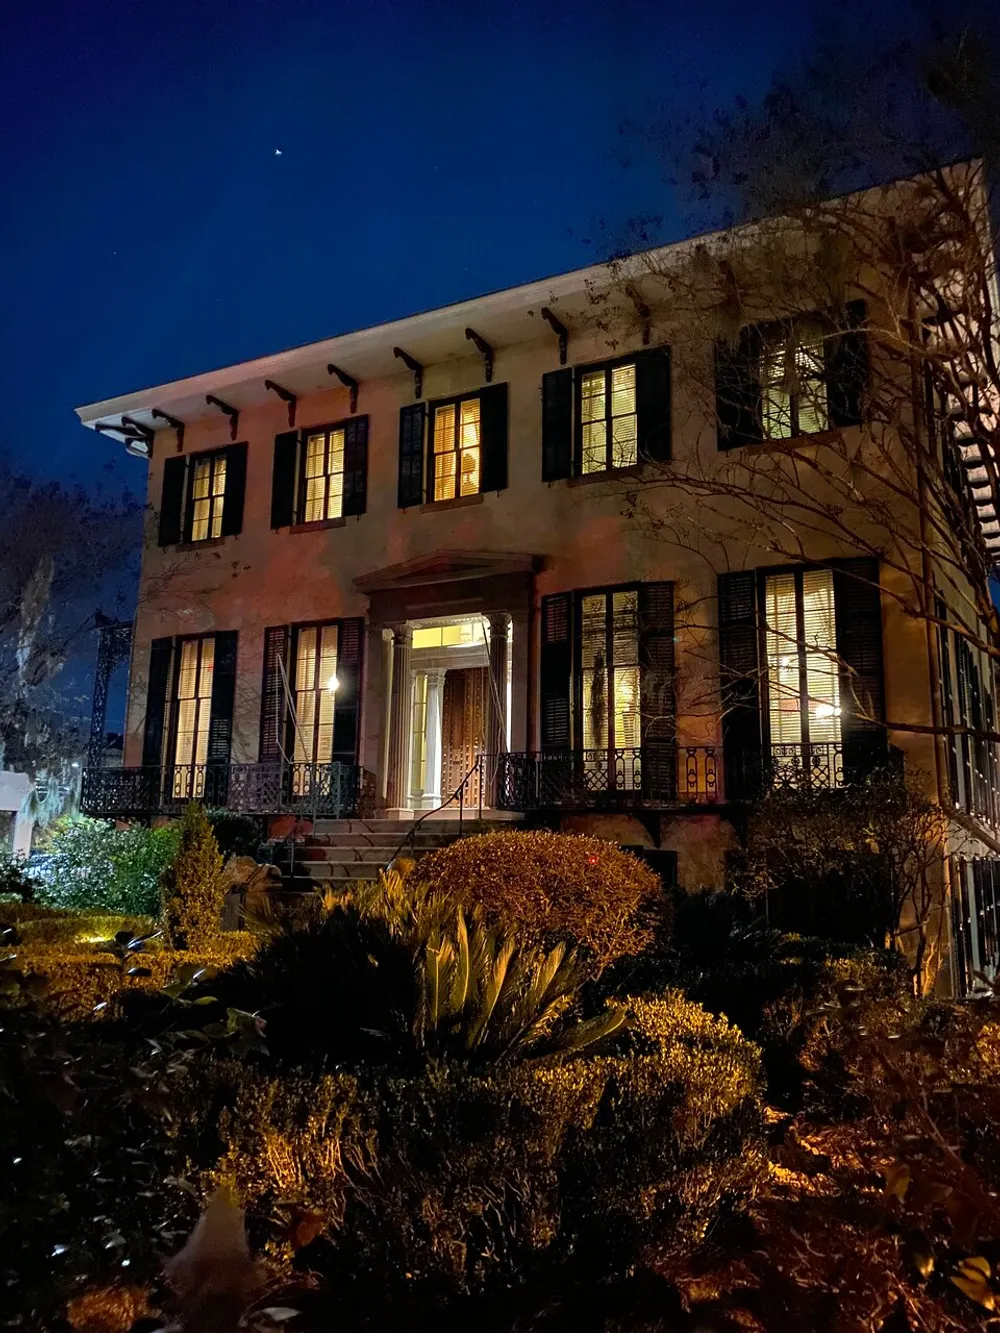 A stately two-story house with warm interior lighting is photographed at night showcasing its classic architecture and lush garden under a twilight sky